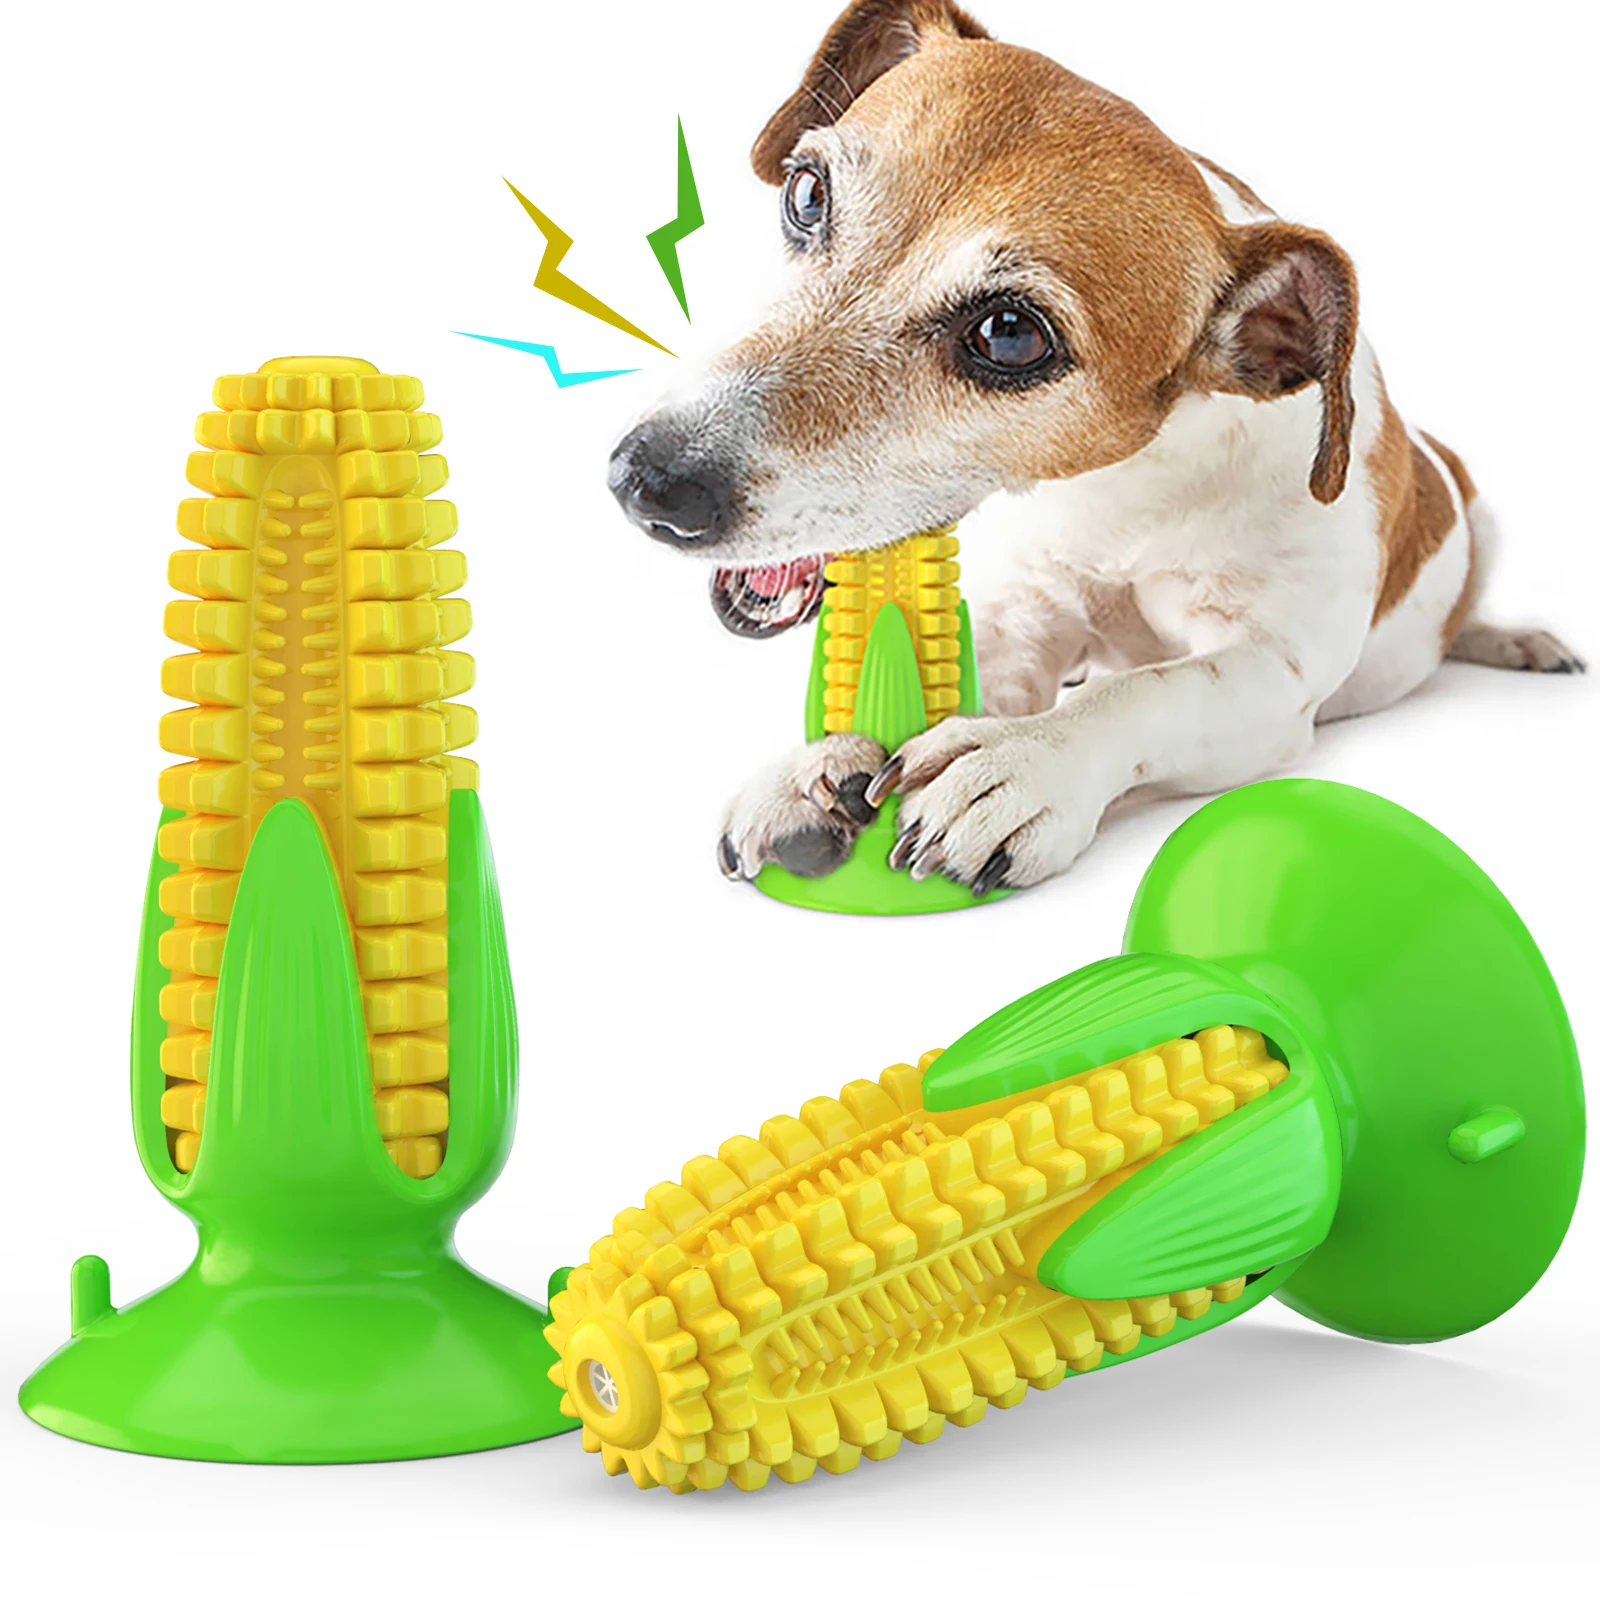 

Dog Chew Toys For Puppy Toothbrush Clean Teeth Interactive Corn Toys Aggressive Chewers Small Meduium Large Breed, Yellow